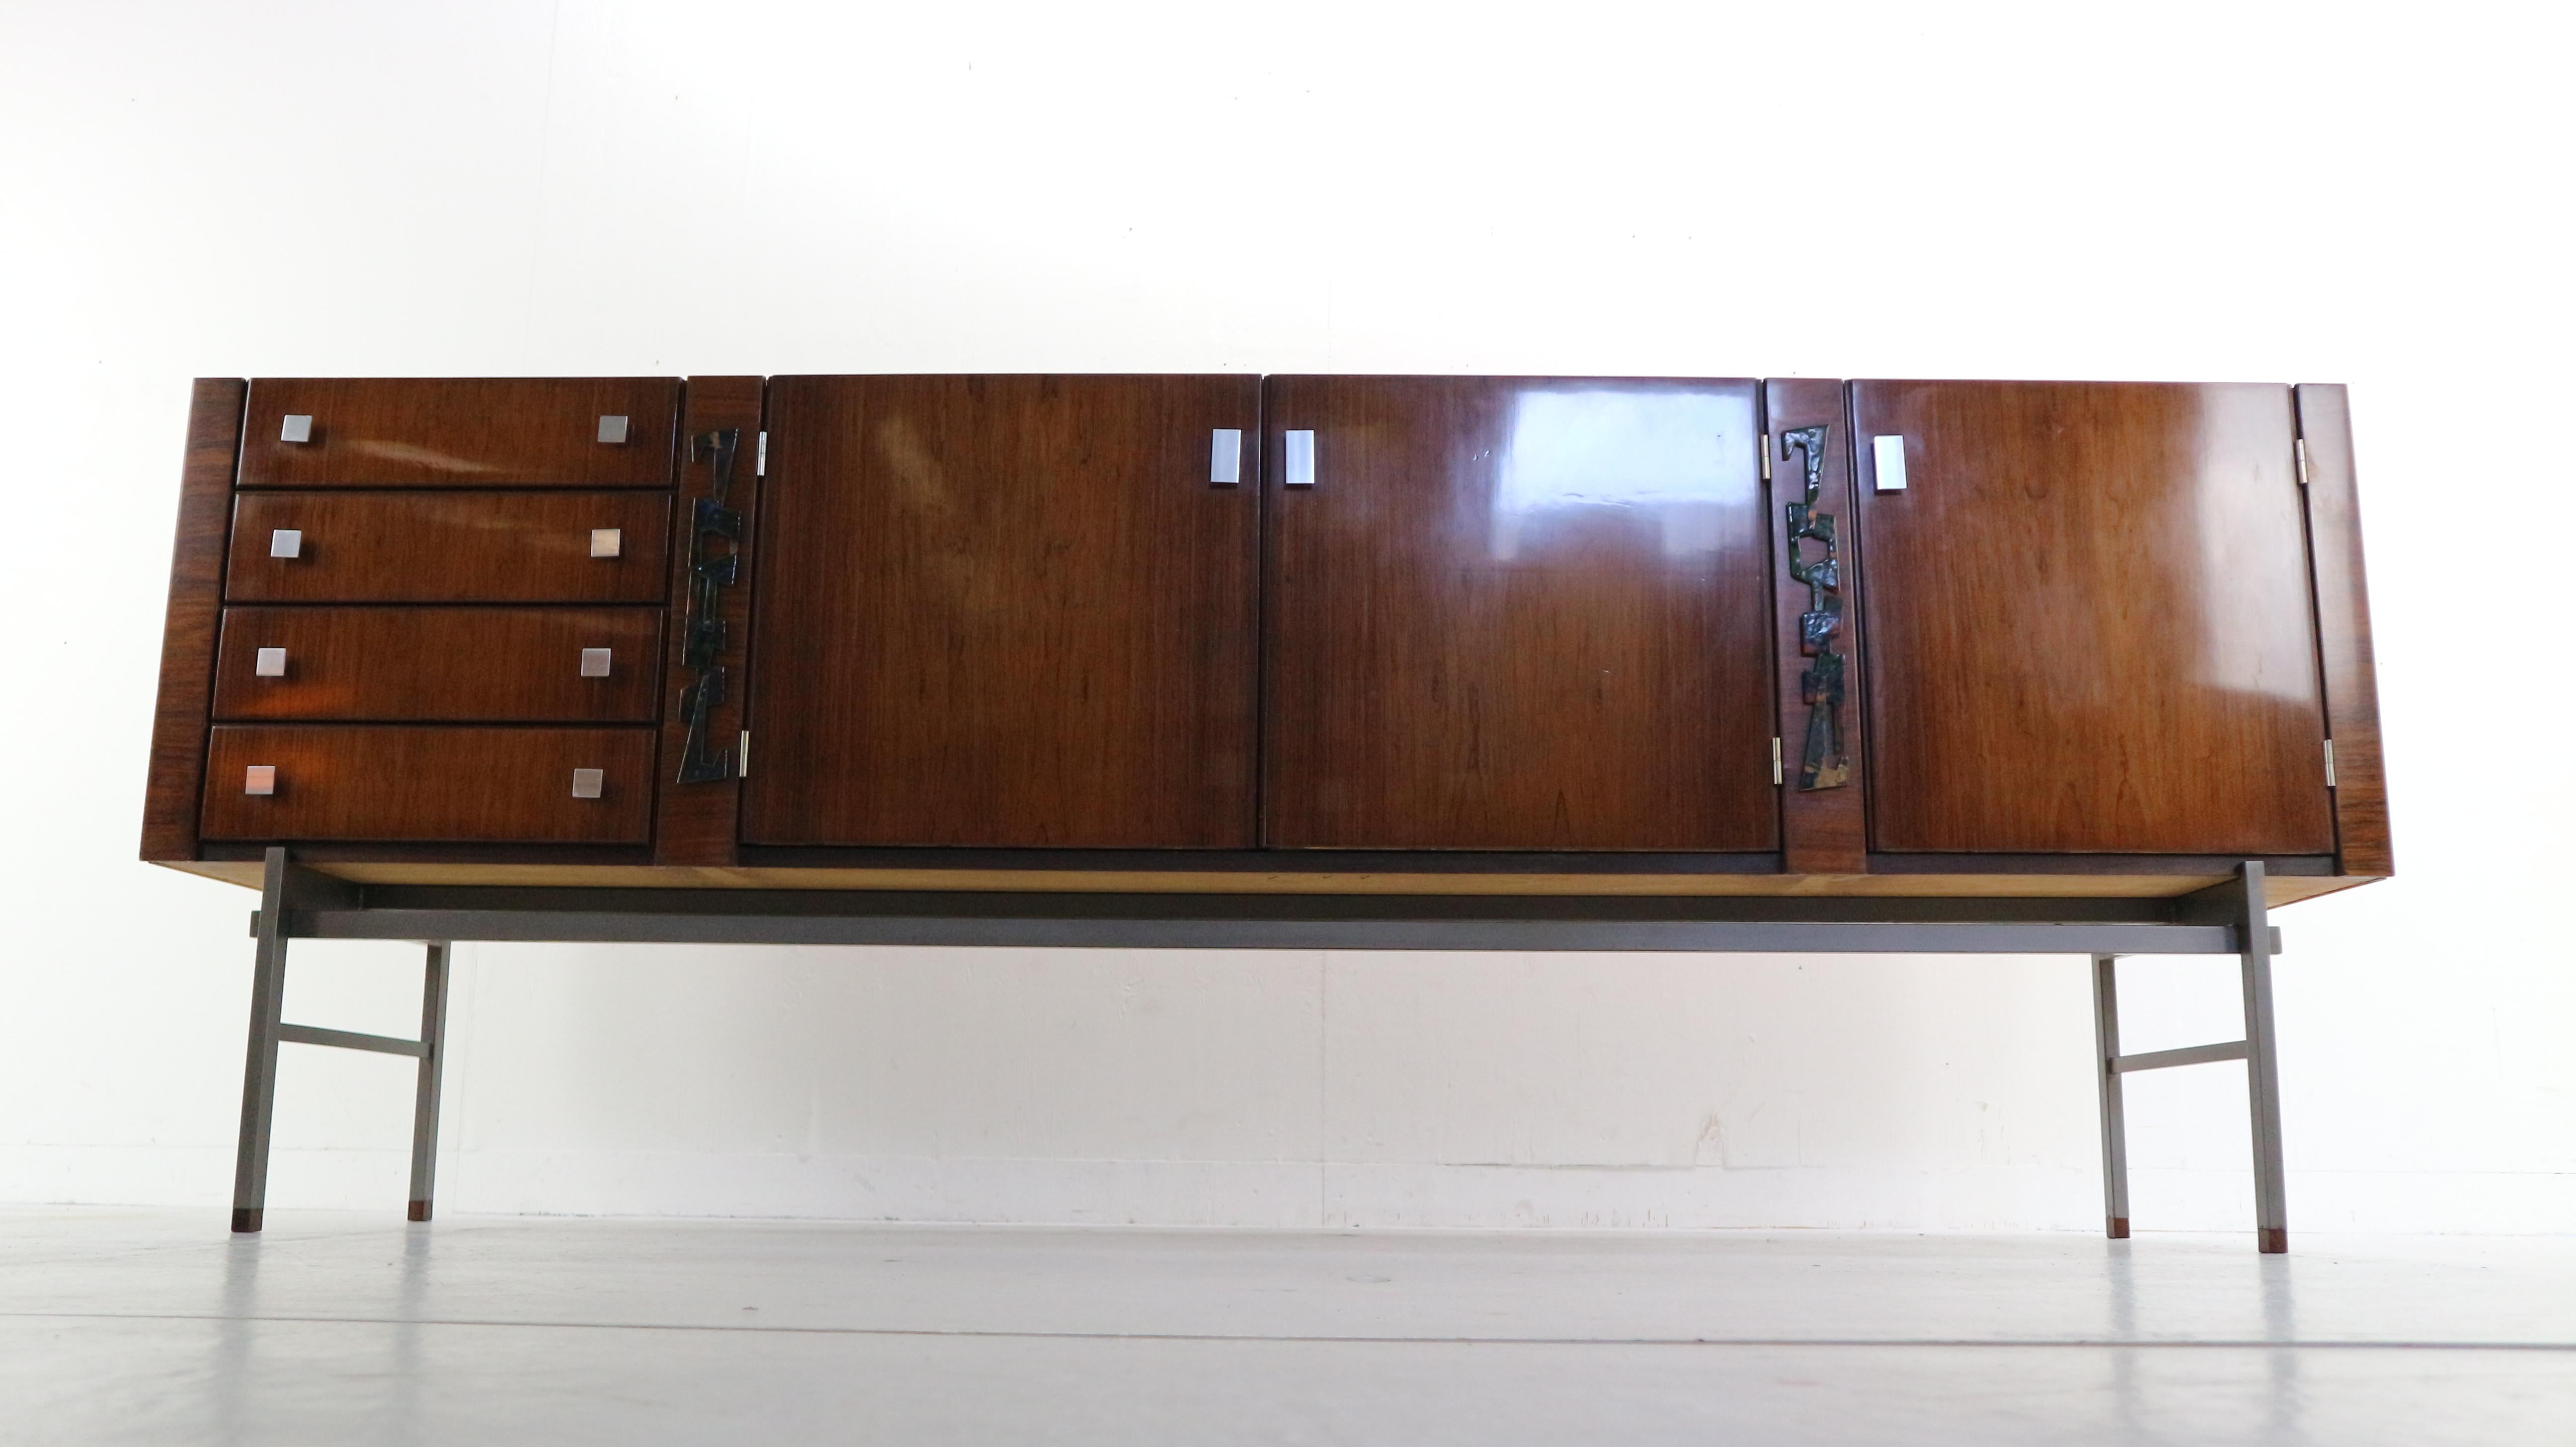 Sideboard design by the architect Alfred Hendrickx in 1960s, Belgium.
This extra large sideboard is made of rosewood and standing on minimalistic metal feet.
Beautiful enameled art details on the sides.
Due to CITES regulations the shipping